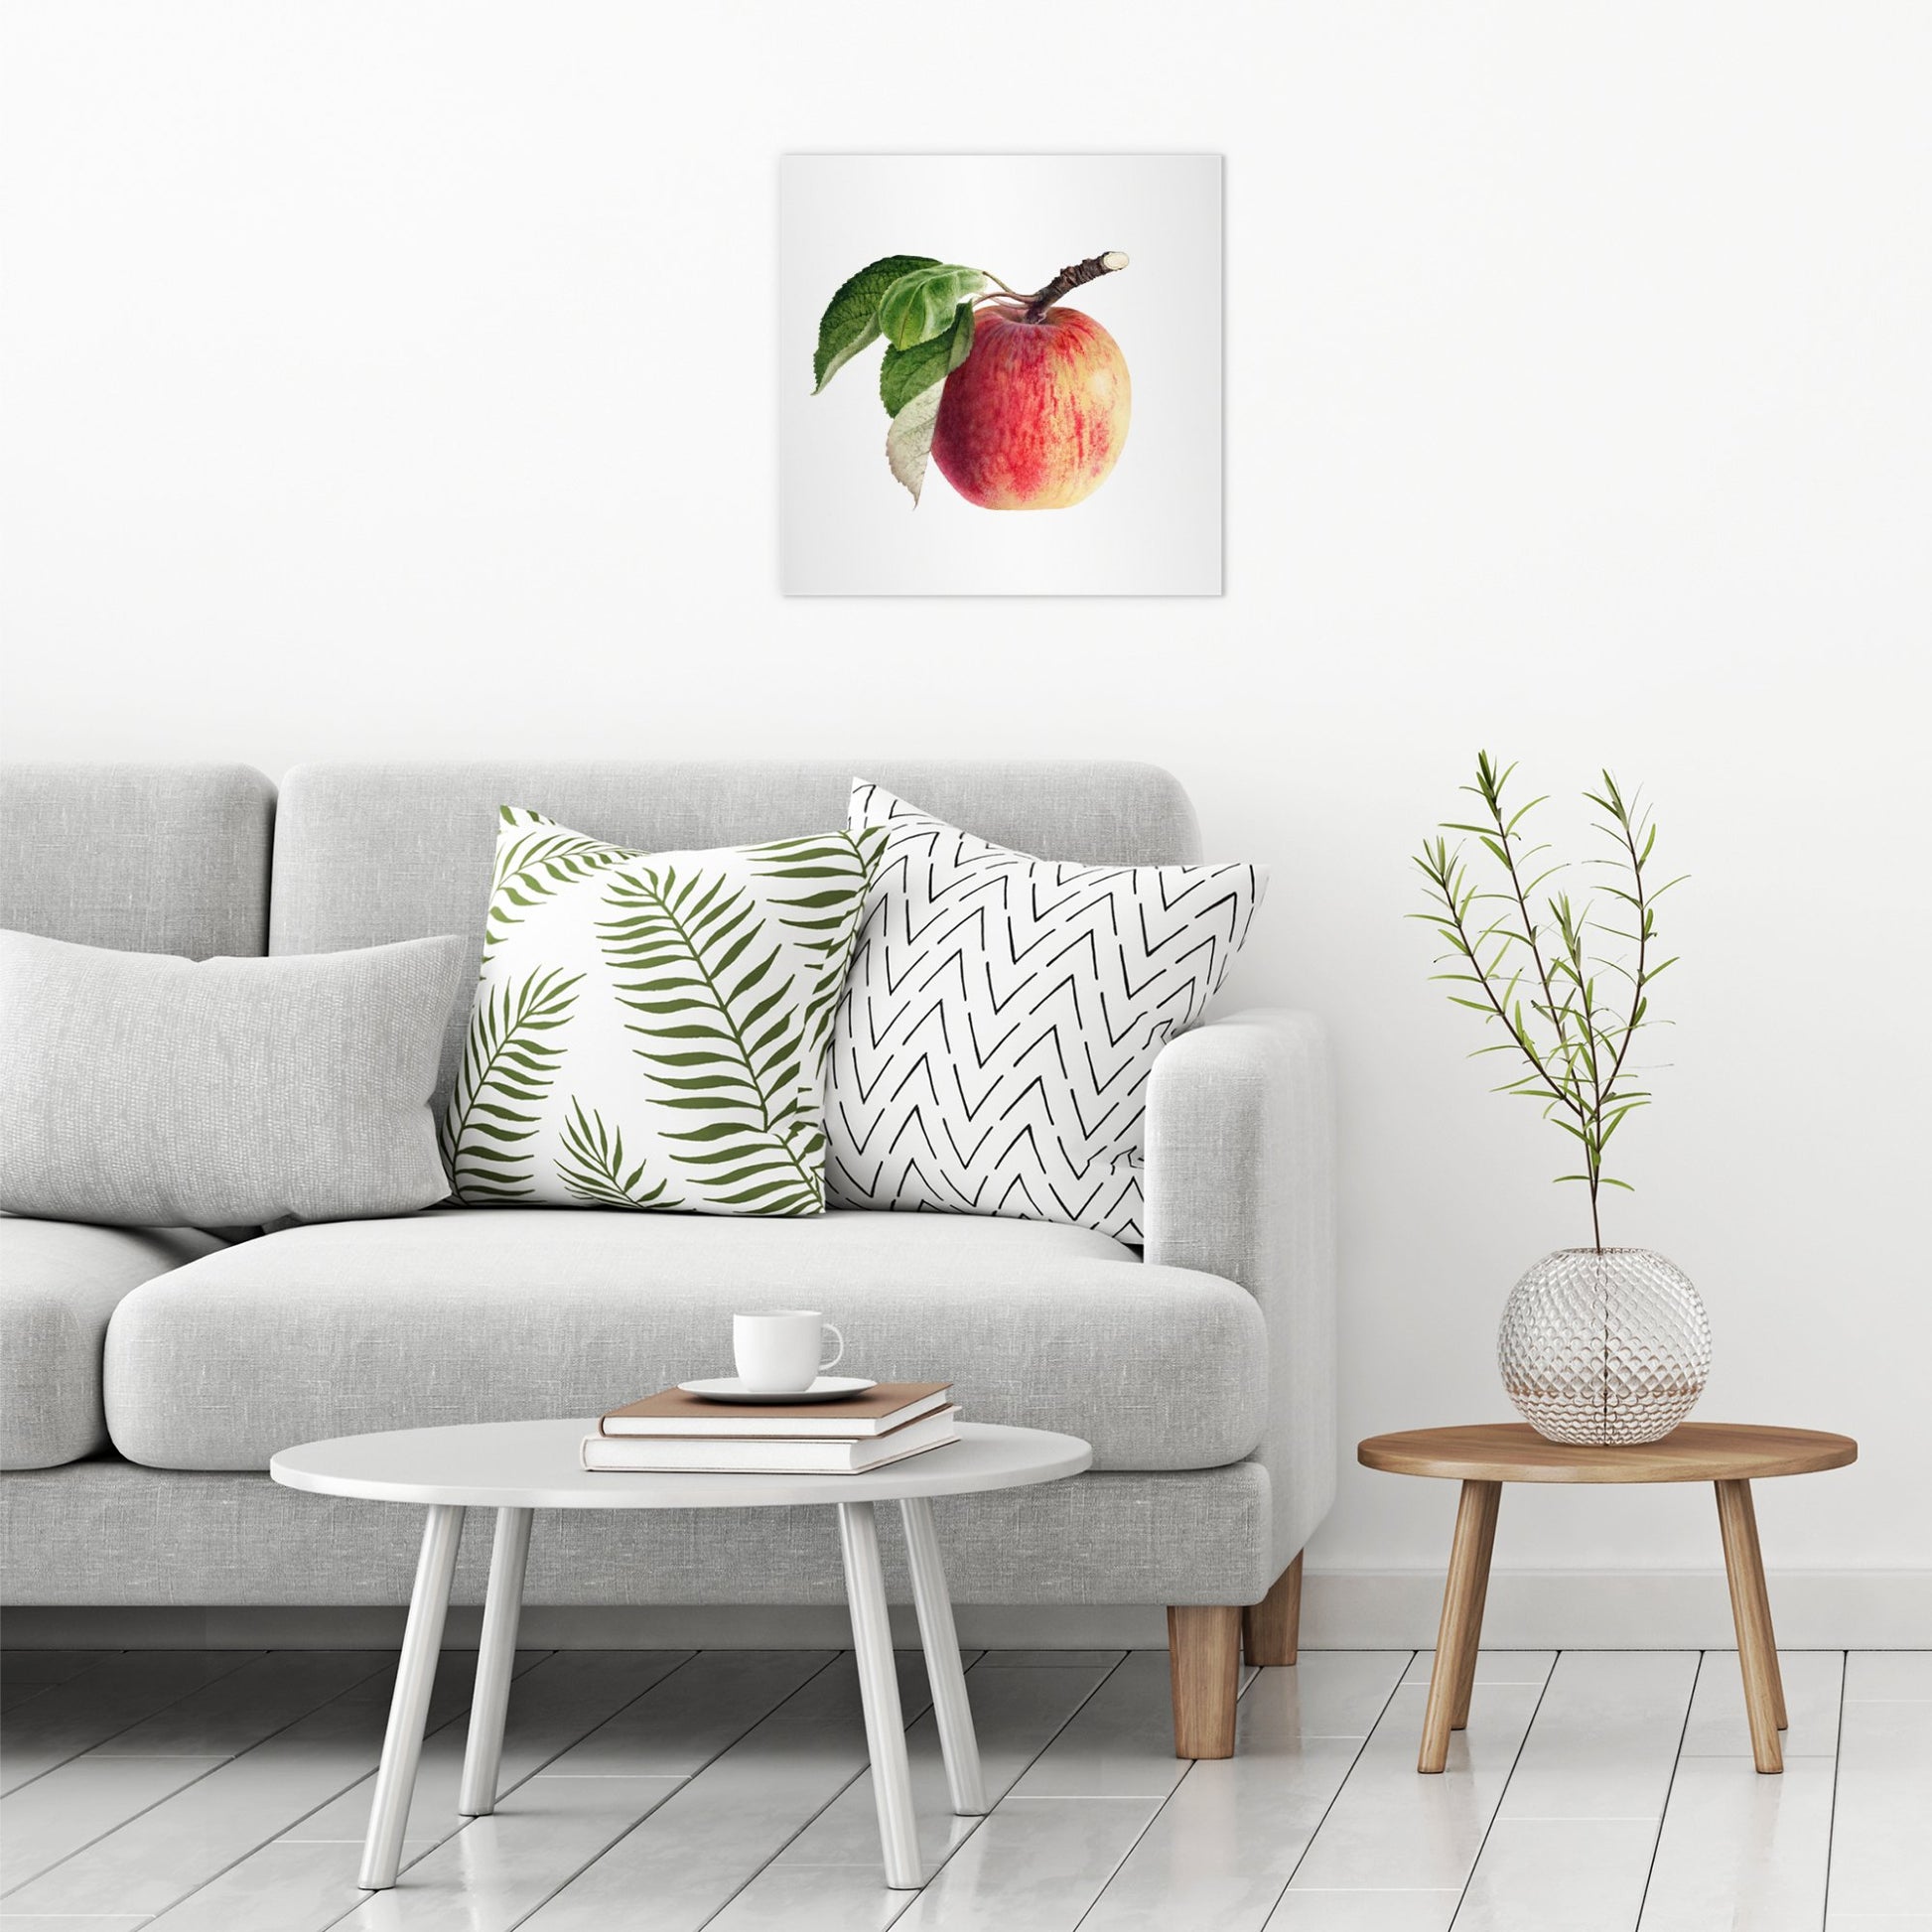 A contemporary modern room view showing a large size metal art poster display plate with printed design of a Vintage Apple Illustration